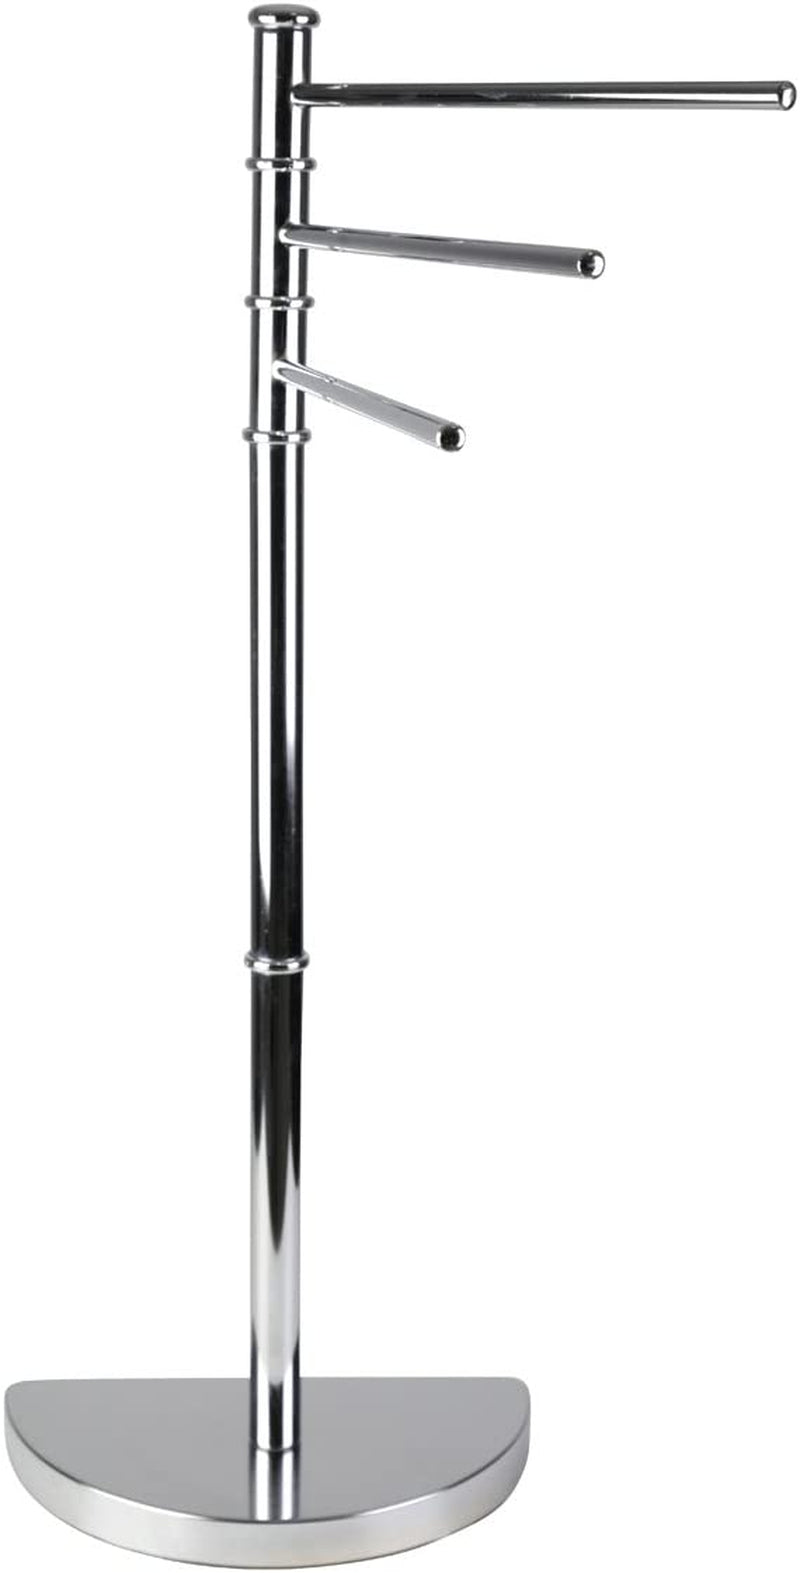 Axentia Lianos Free-Standing Swivel Towel Holder Rack, Chromed Metal Hand Bath Towel Stand, Bathroom Towel Hanger with 3 Adjustable Arms and Semicircular Base, Approx. 32,5 X 86 X 17,5 Cm High, Silver